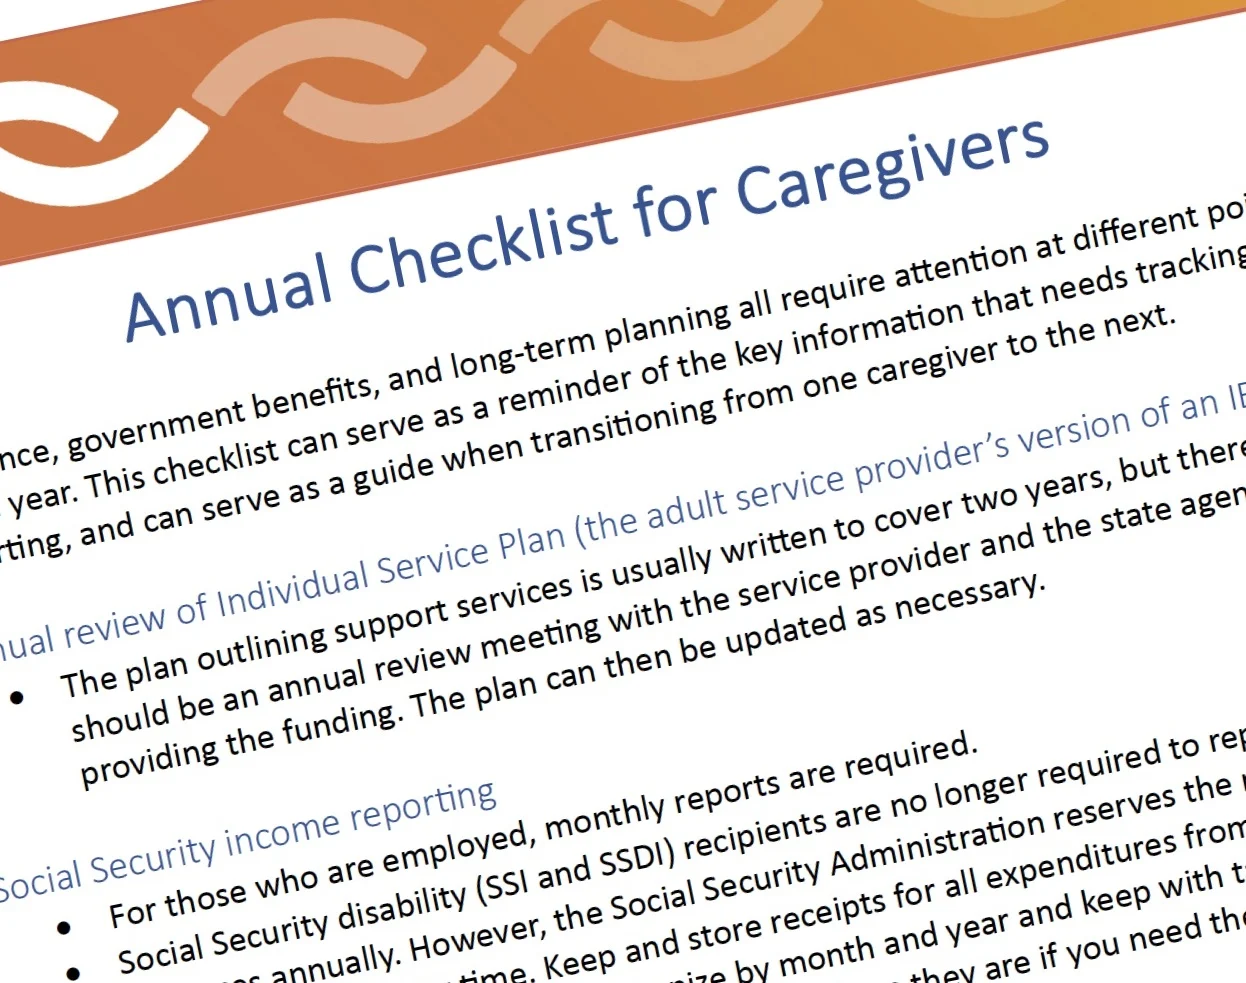 Screen shot of a document called Annual Checklist for Caregivers